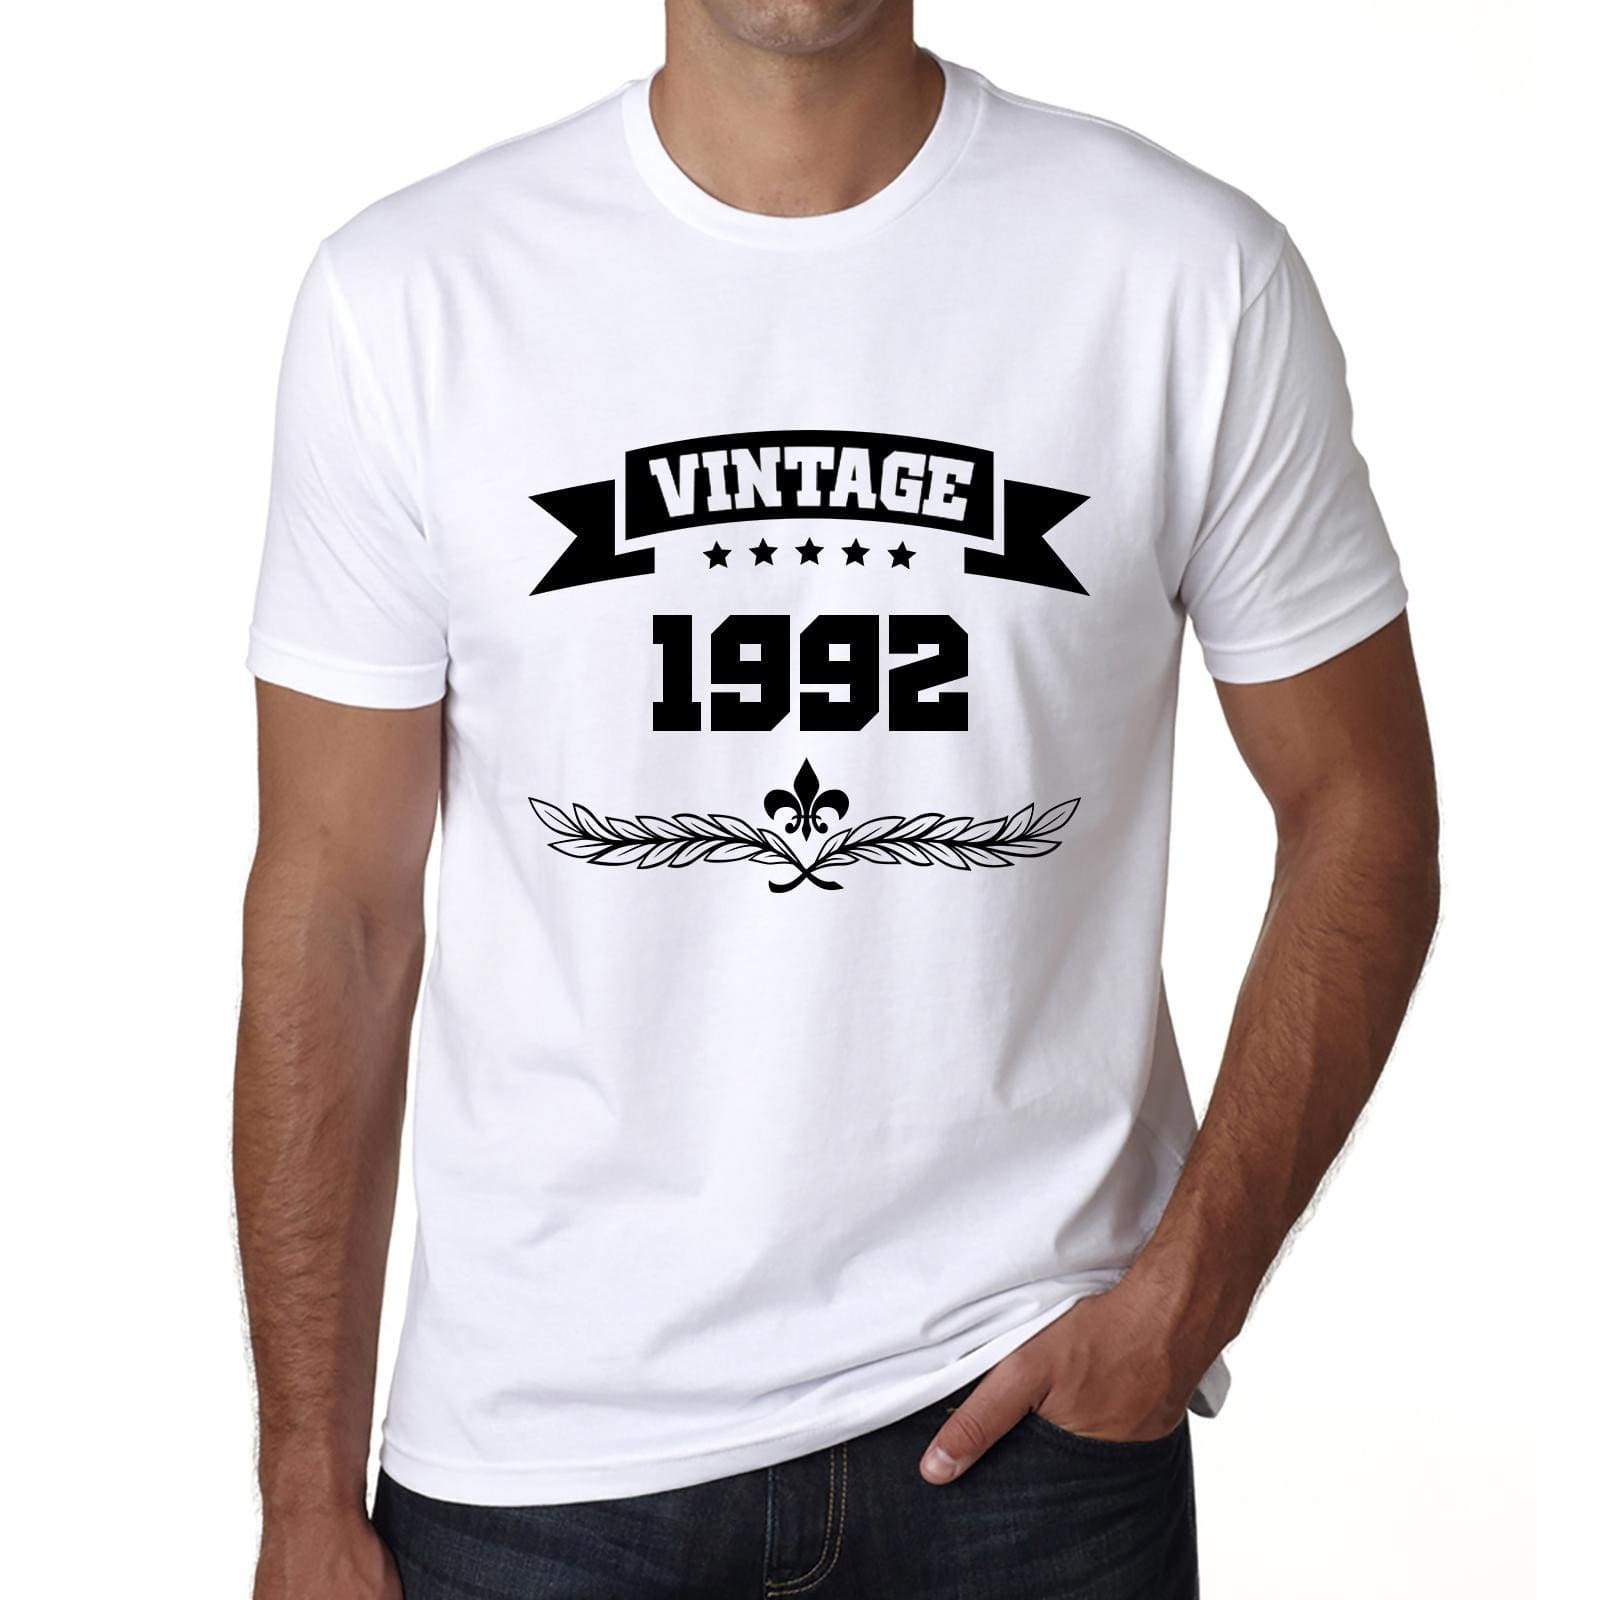 1992 Vintage Year White Mens Short Sleeve Round Neck T-Shirt 00096 - White / S - Casual